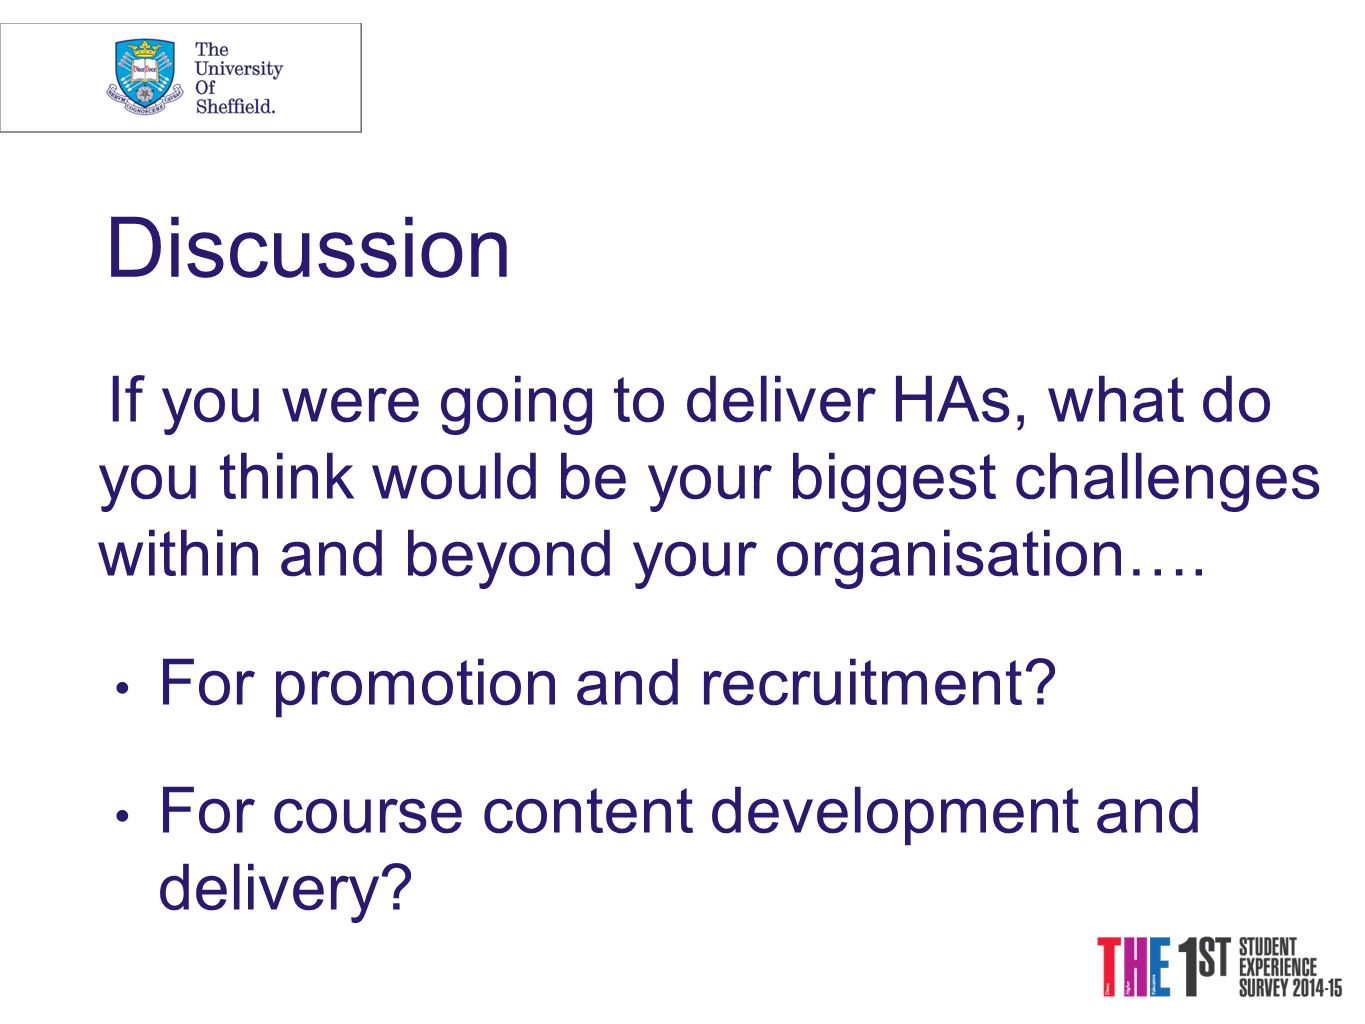 Discussion If you were going to deliver HAs, what do you think would be your biggest challenges within and beyond your organisation….